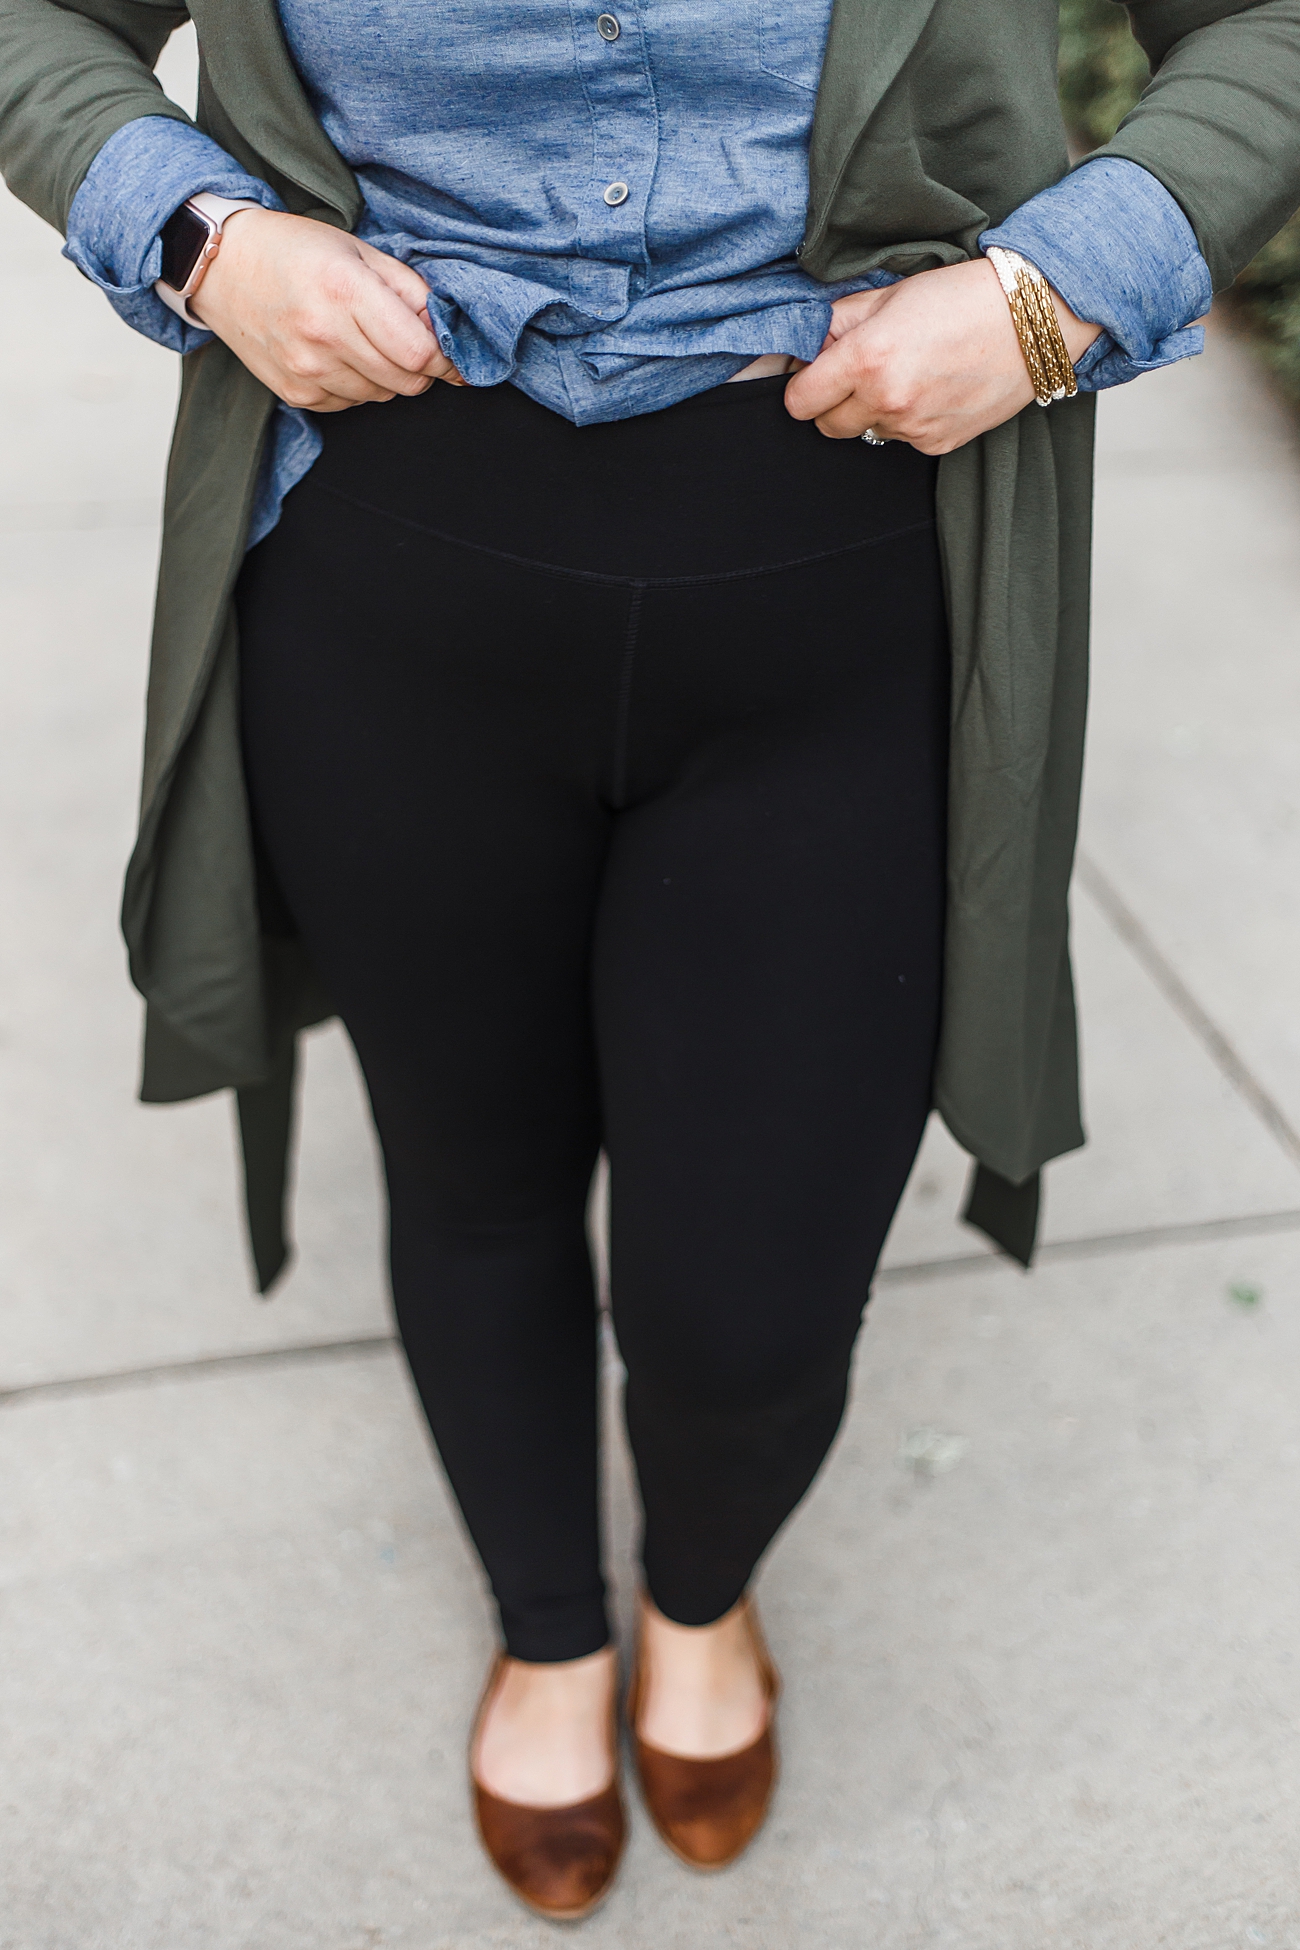 The BEST Ethically Made Black Leggings - See how women size 0-16 wear them! | Fair Trade Black Leggings from Sseko Designs